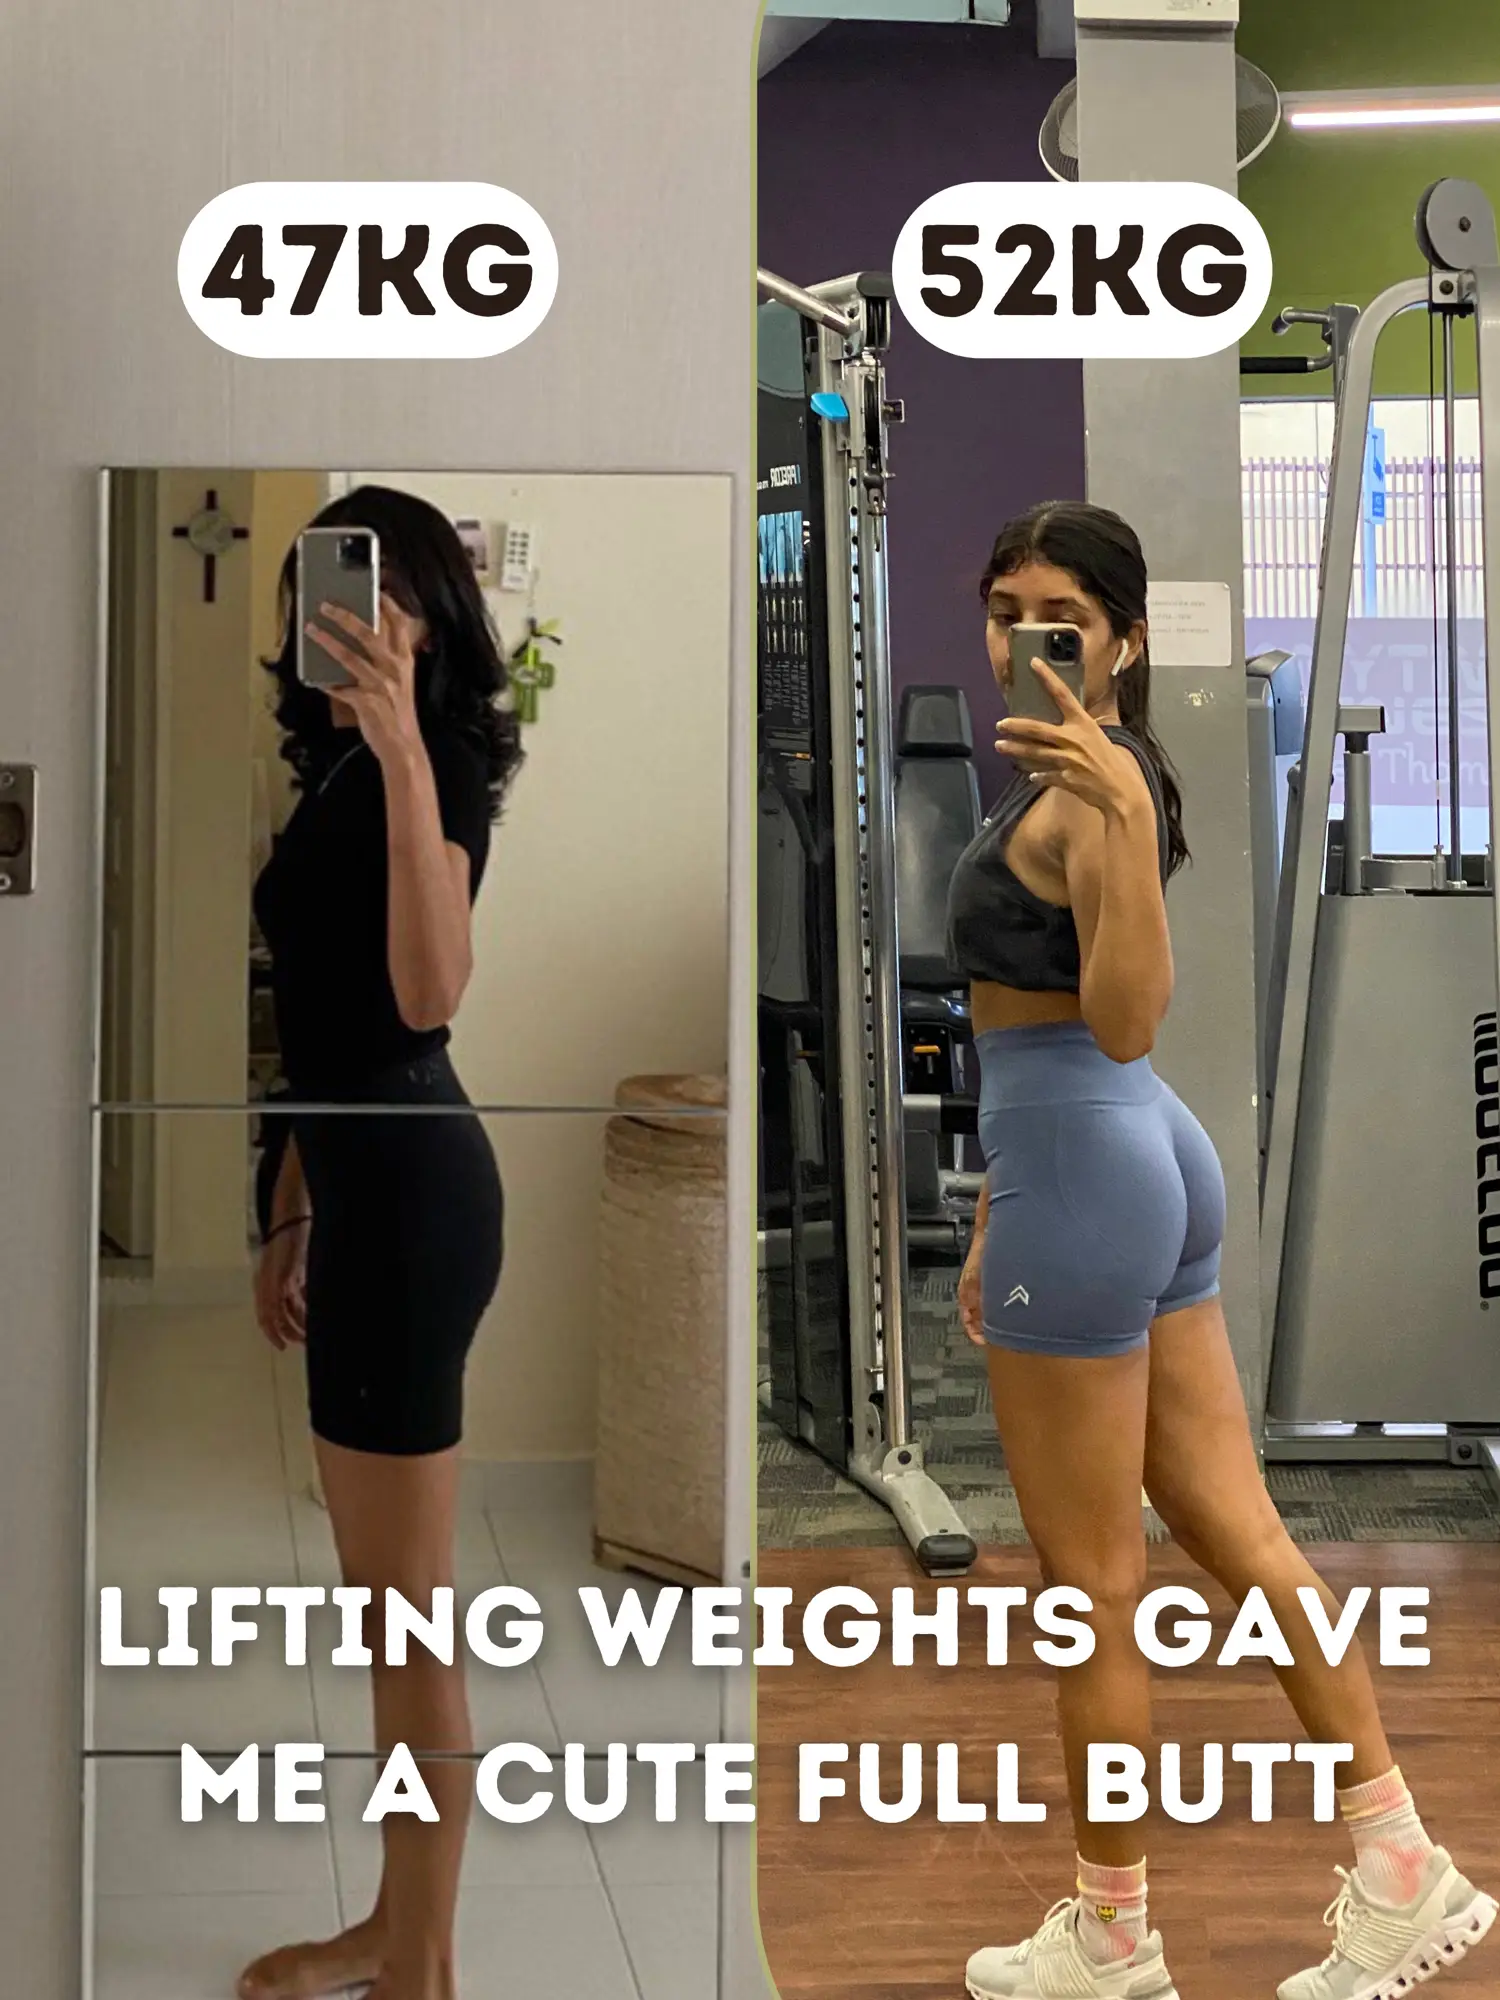 8 figure, perky butt & no diets w this gym app ✨🍑's images(1)